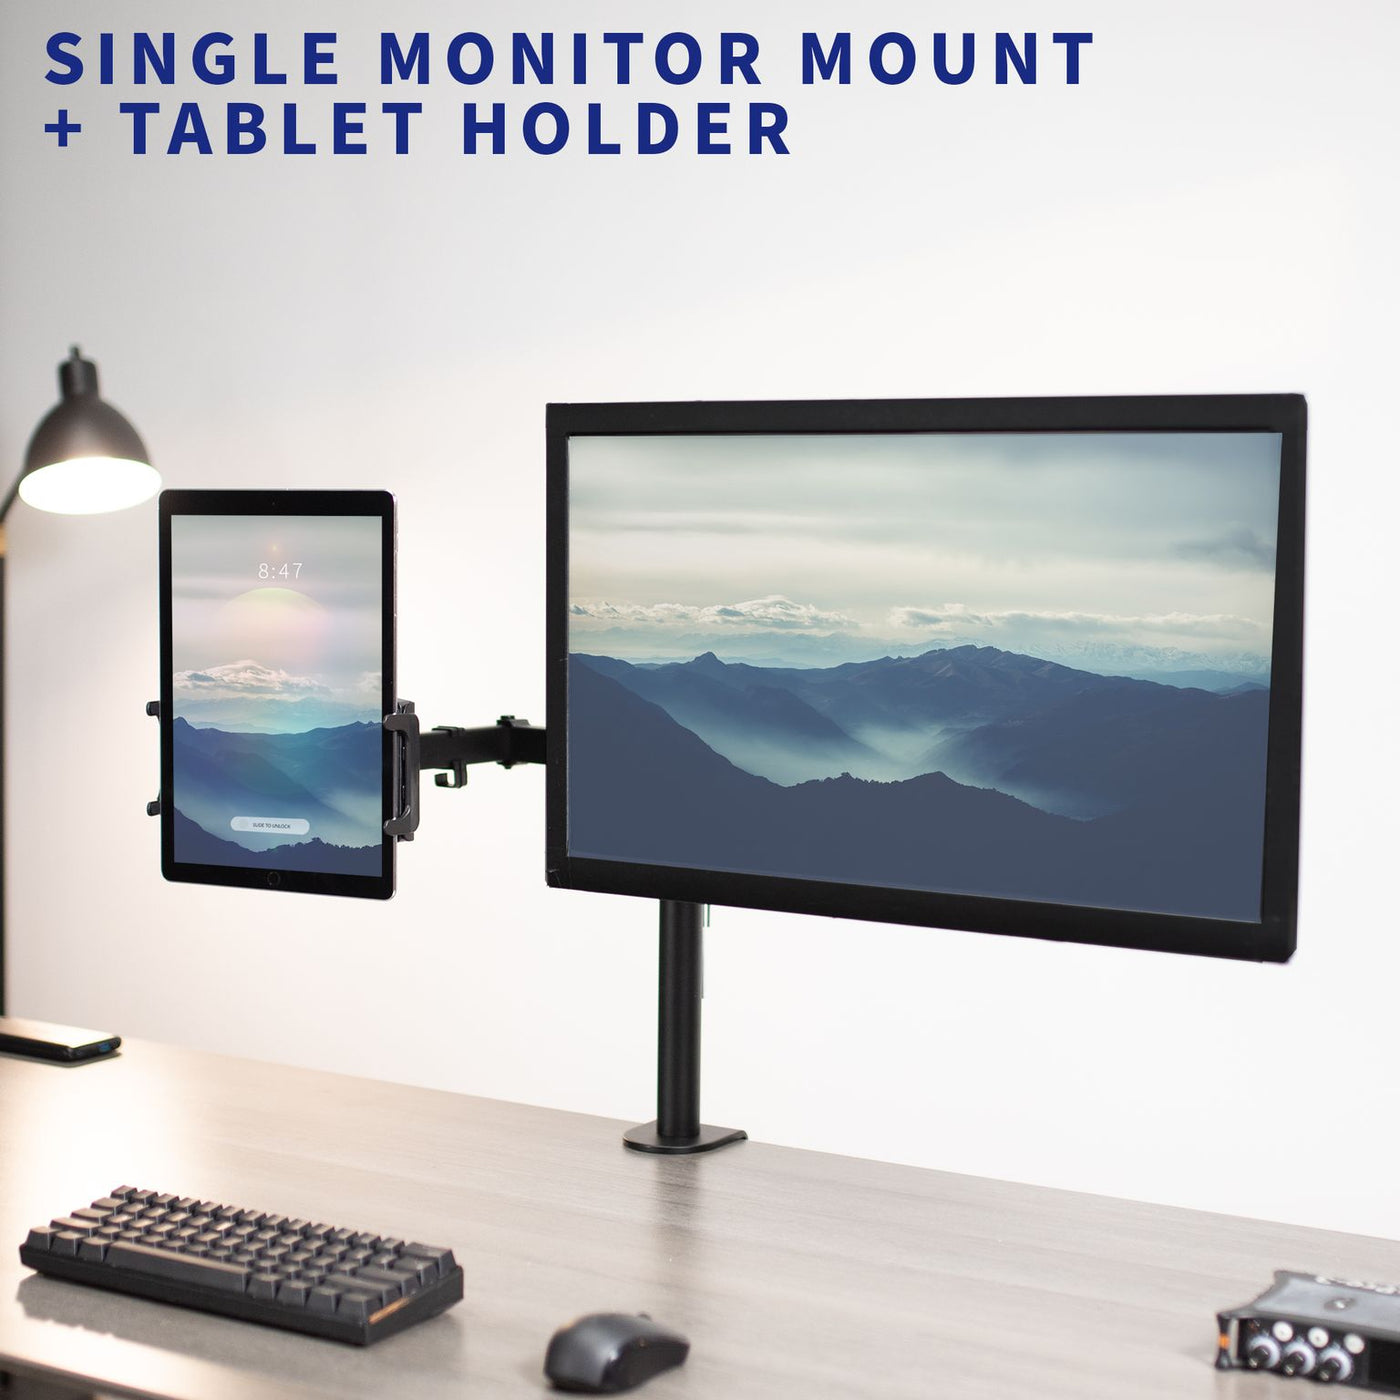 Sturdy single monitor and tablet holder desk mount.